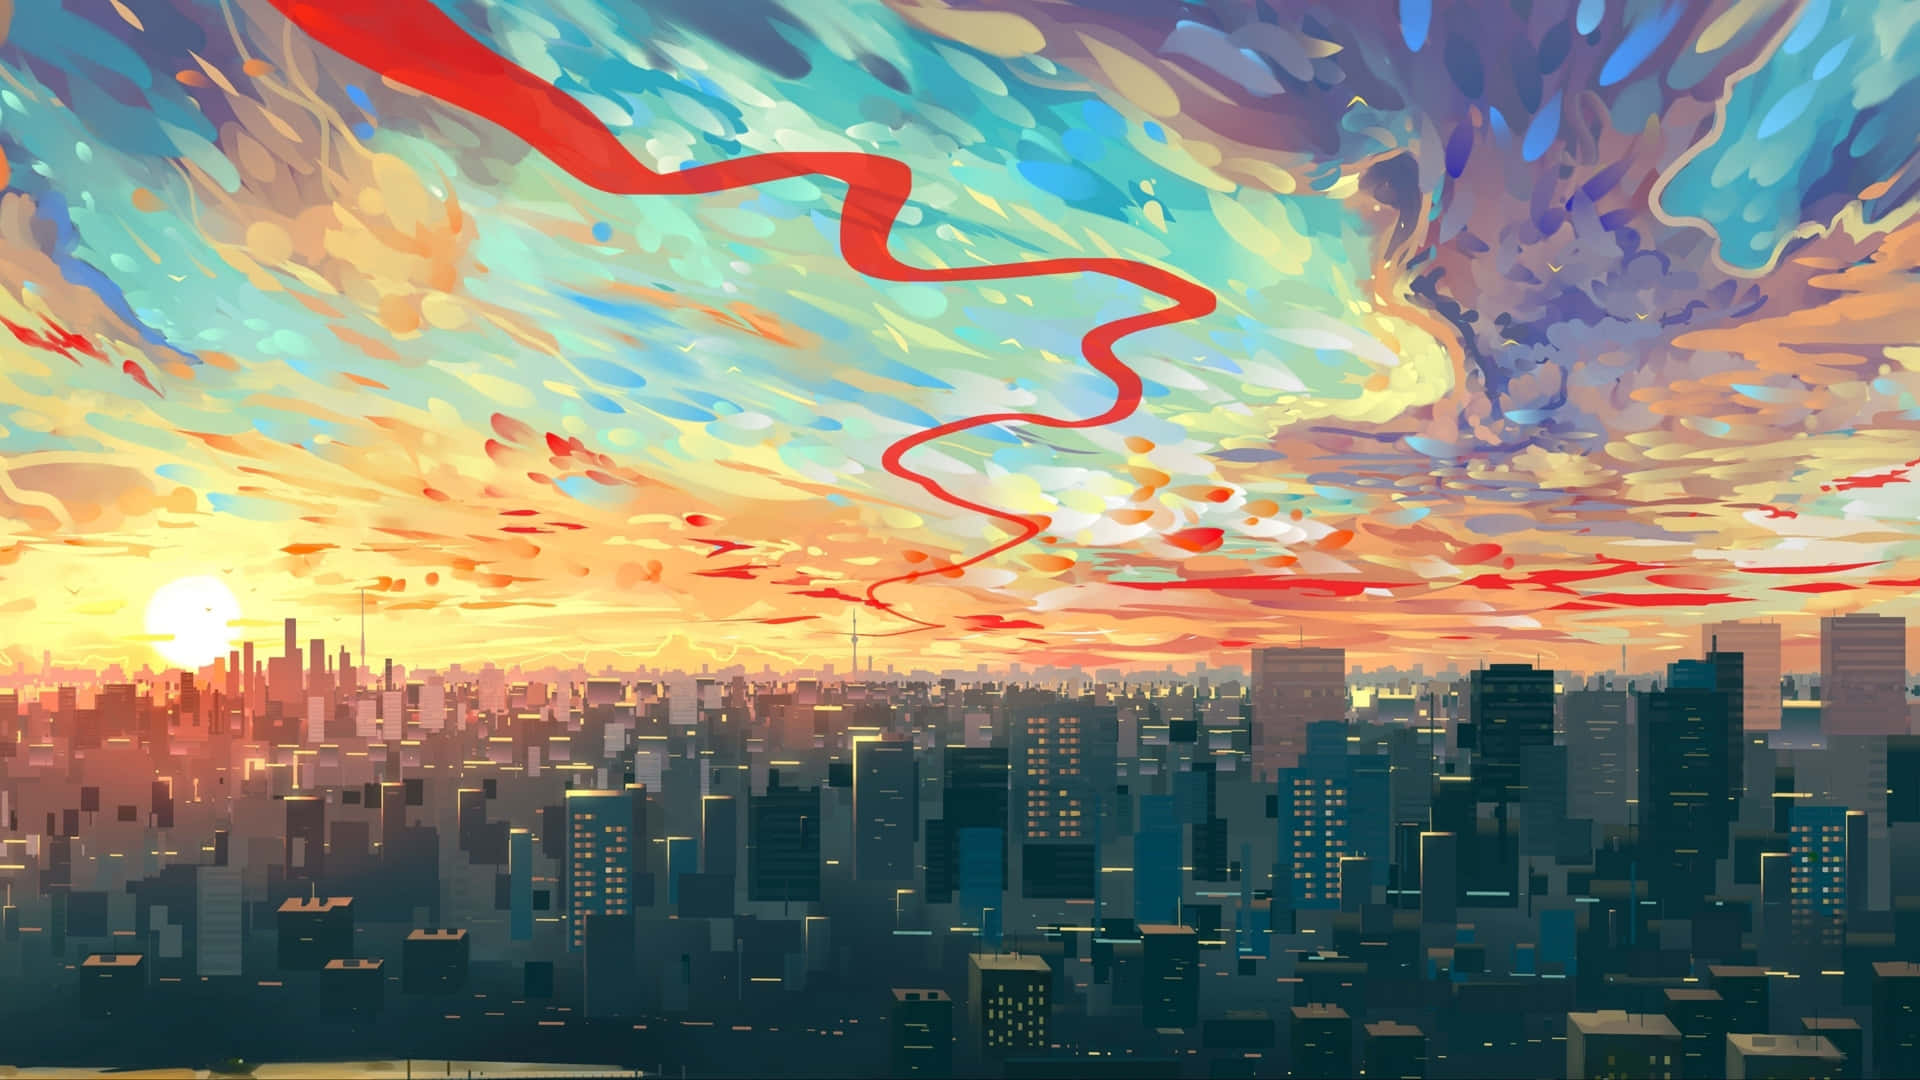 Sunset Skylinewith Red Ribbon Wallpaper